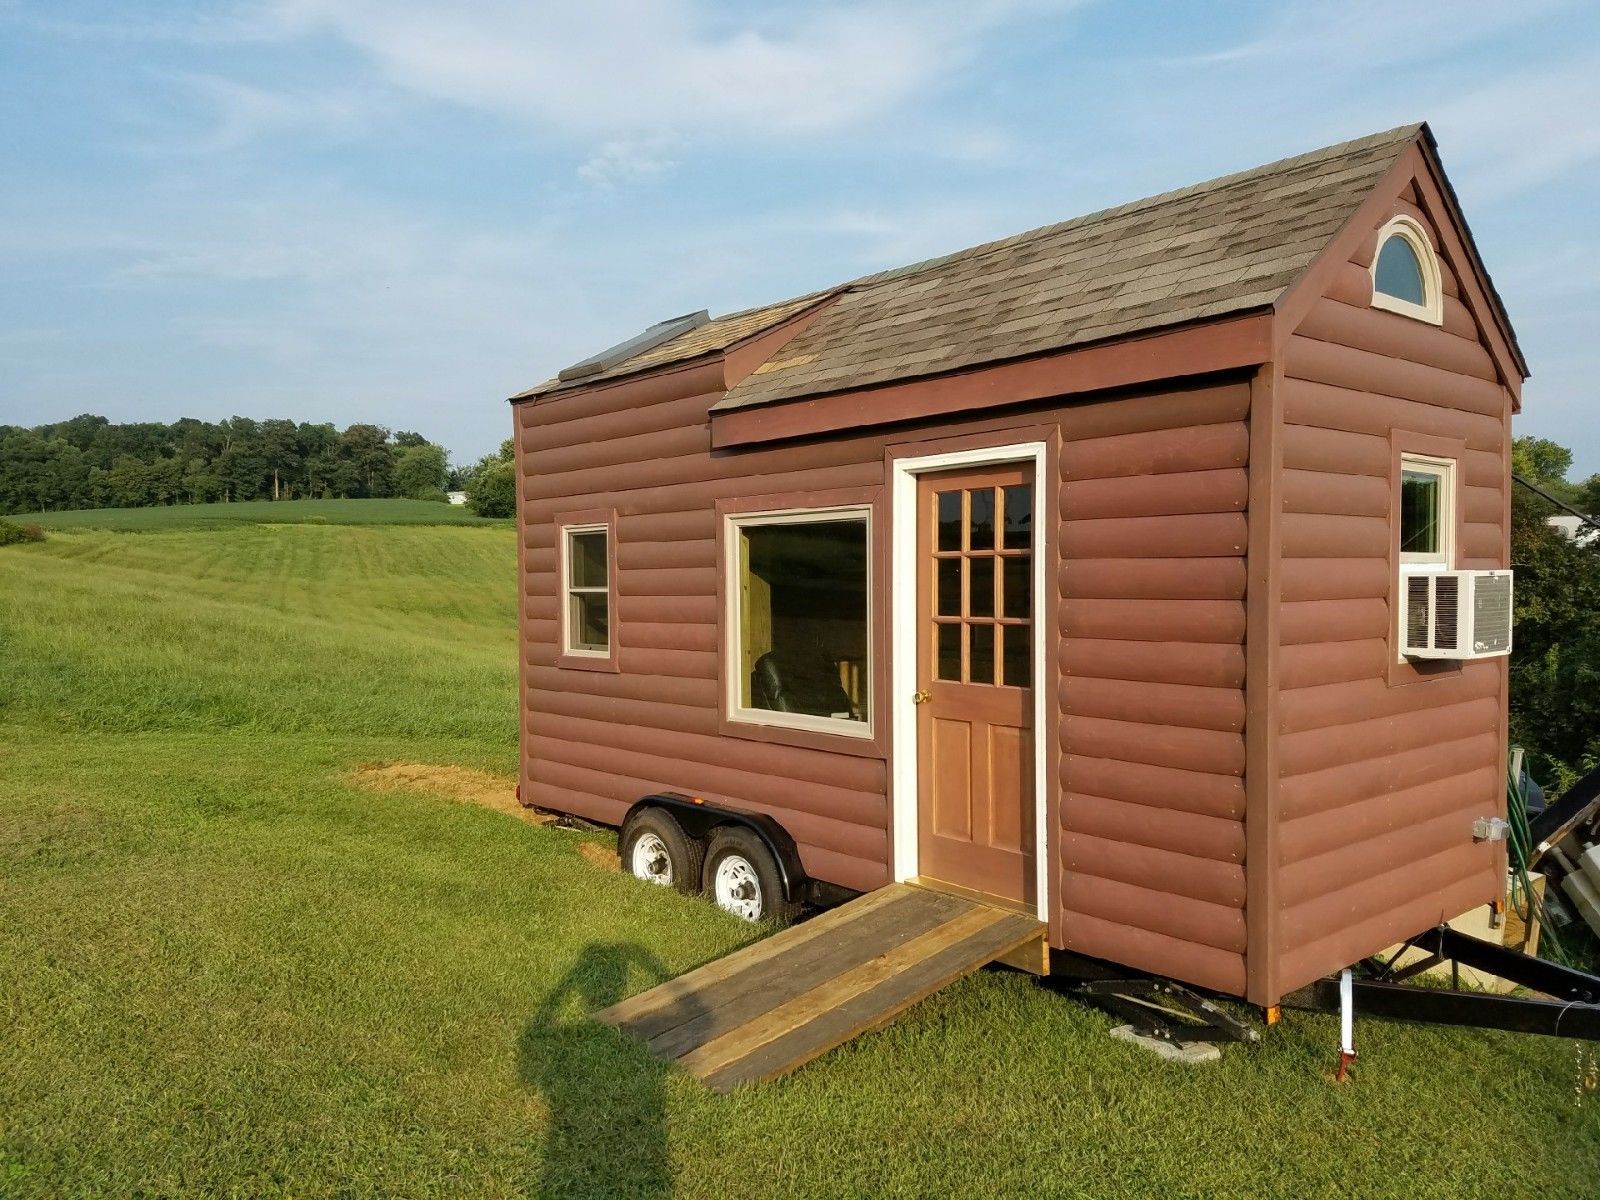 Why People Choose to go Tiny and live in a Tiny Home on Wheels